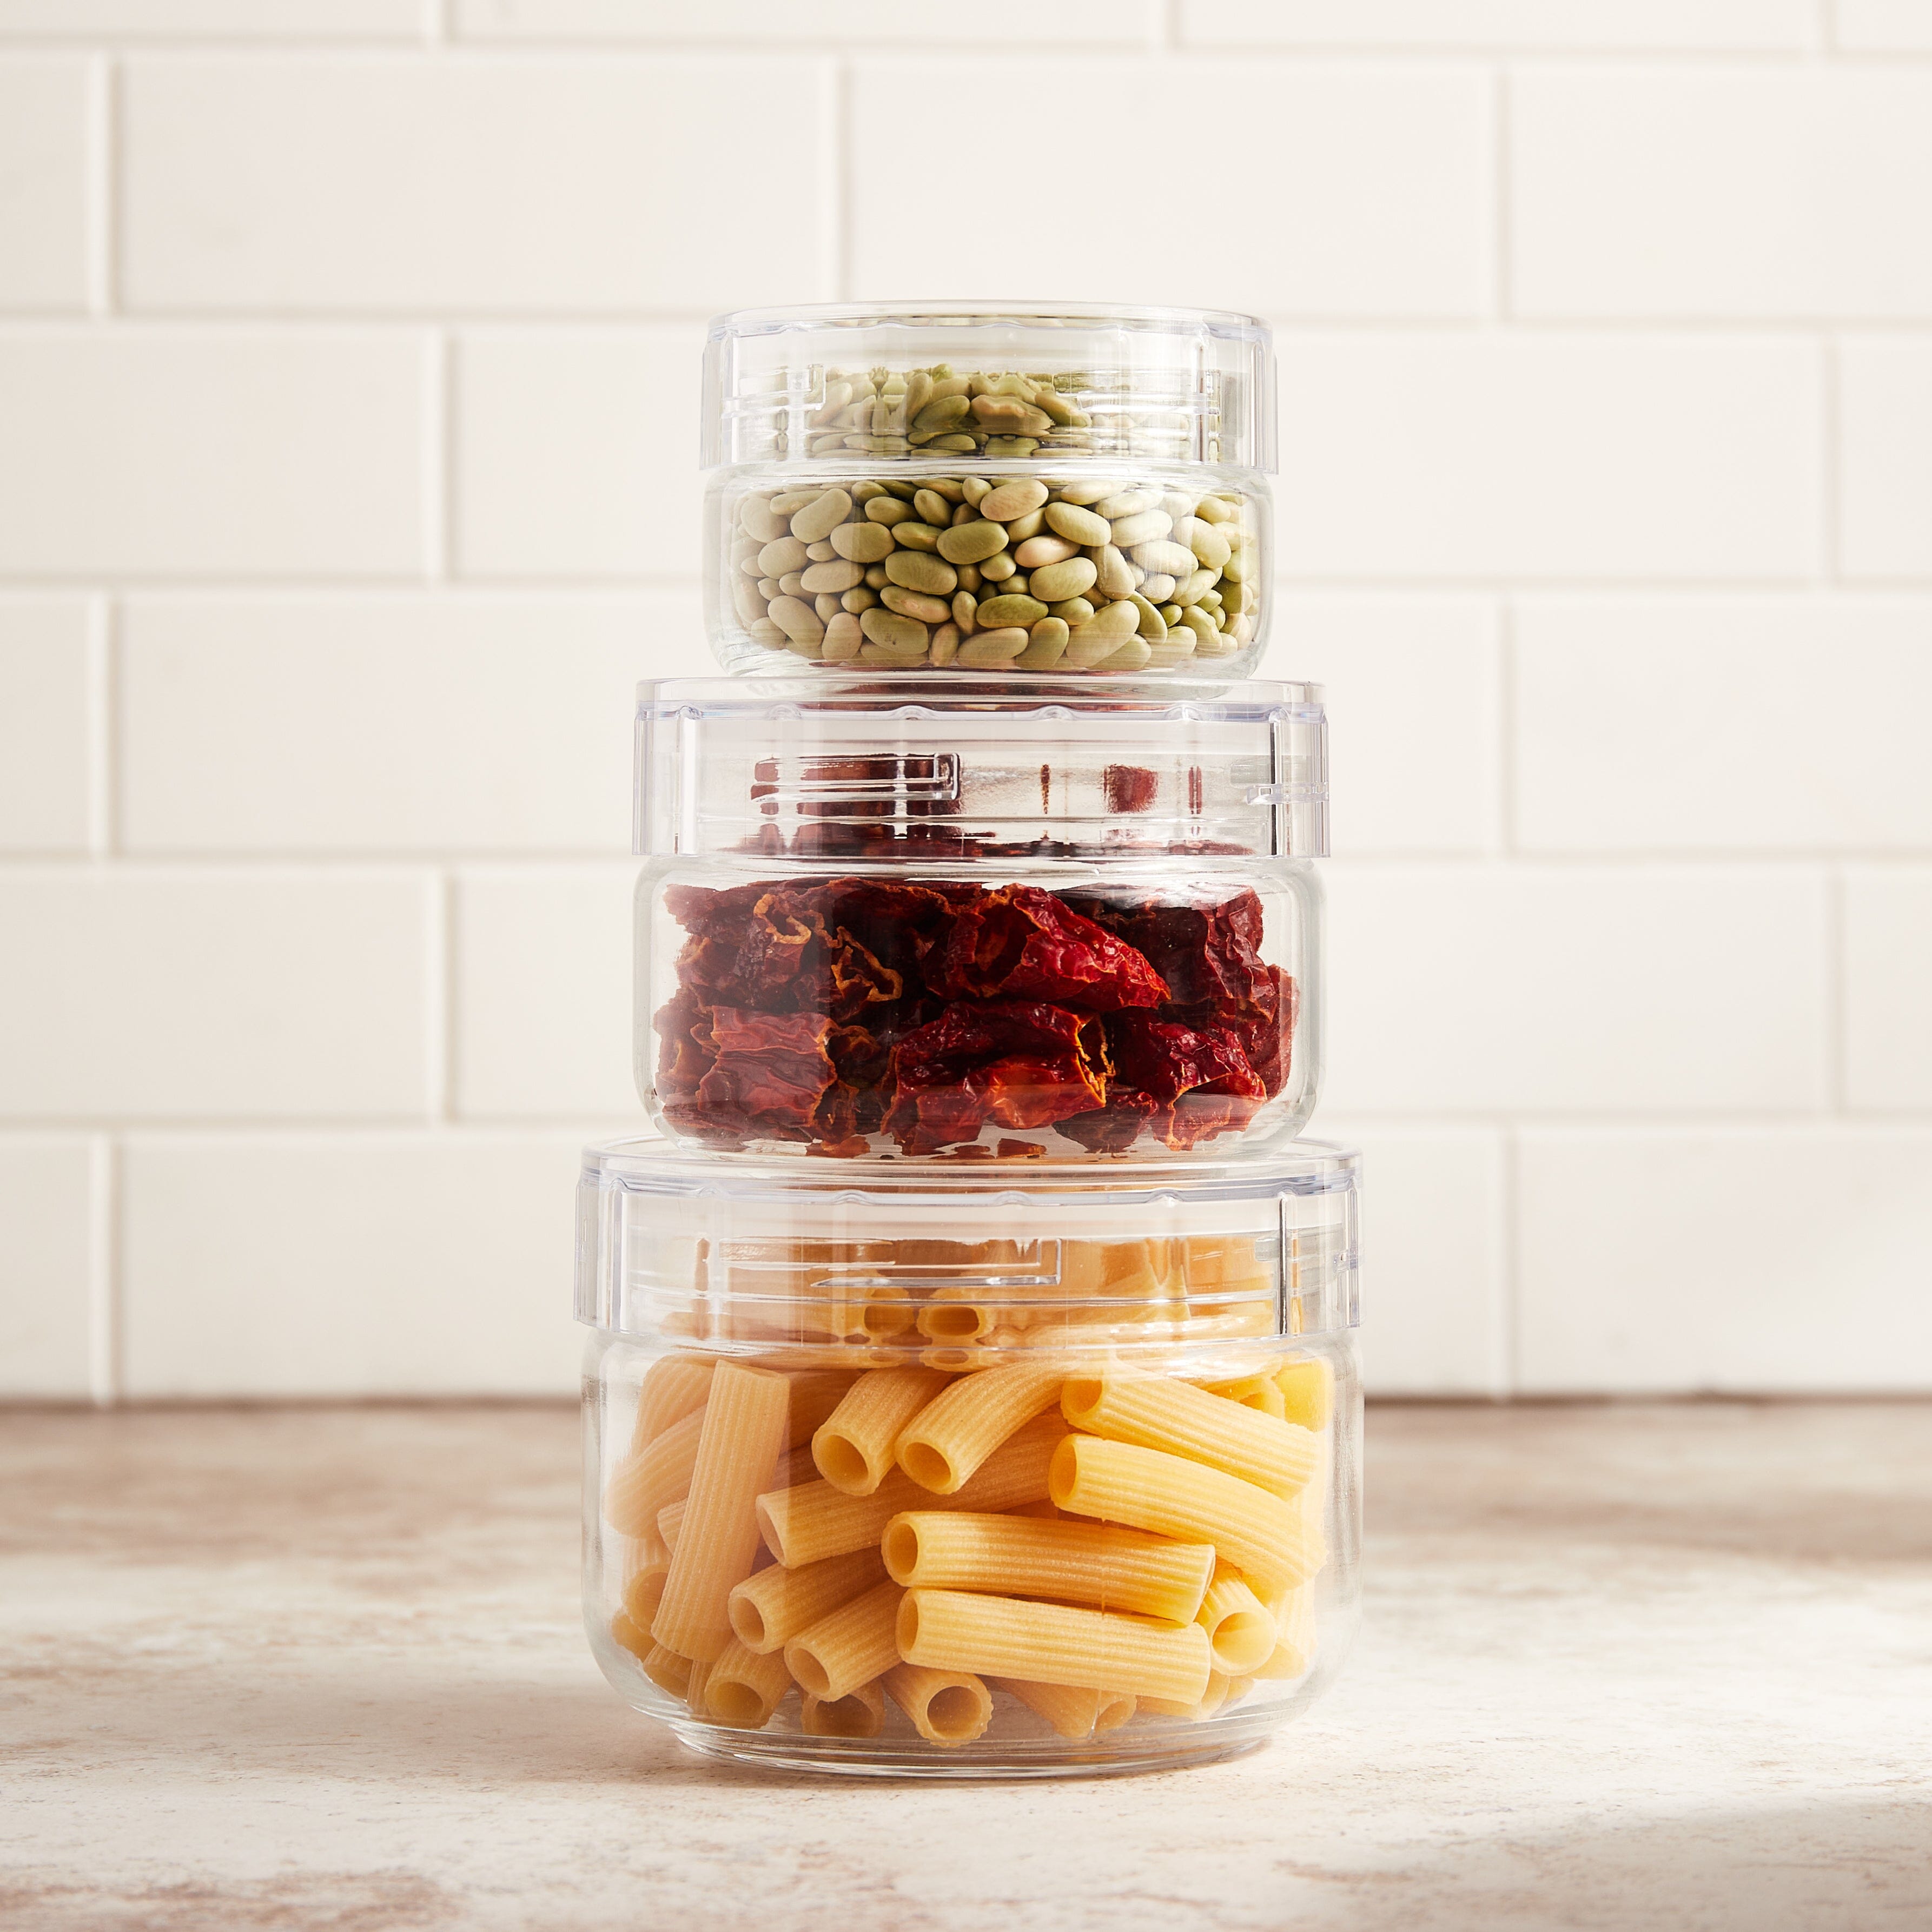 stackable glass storage containers